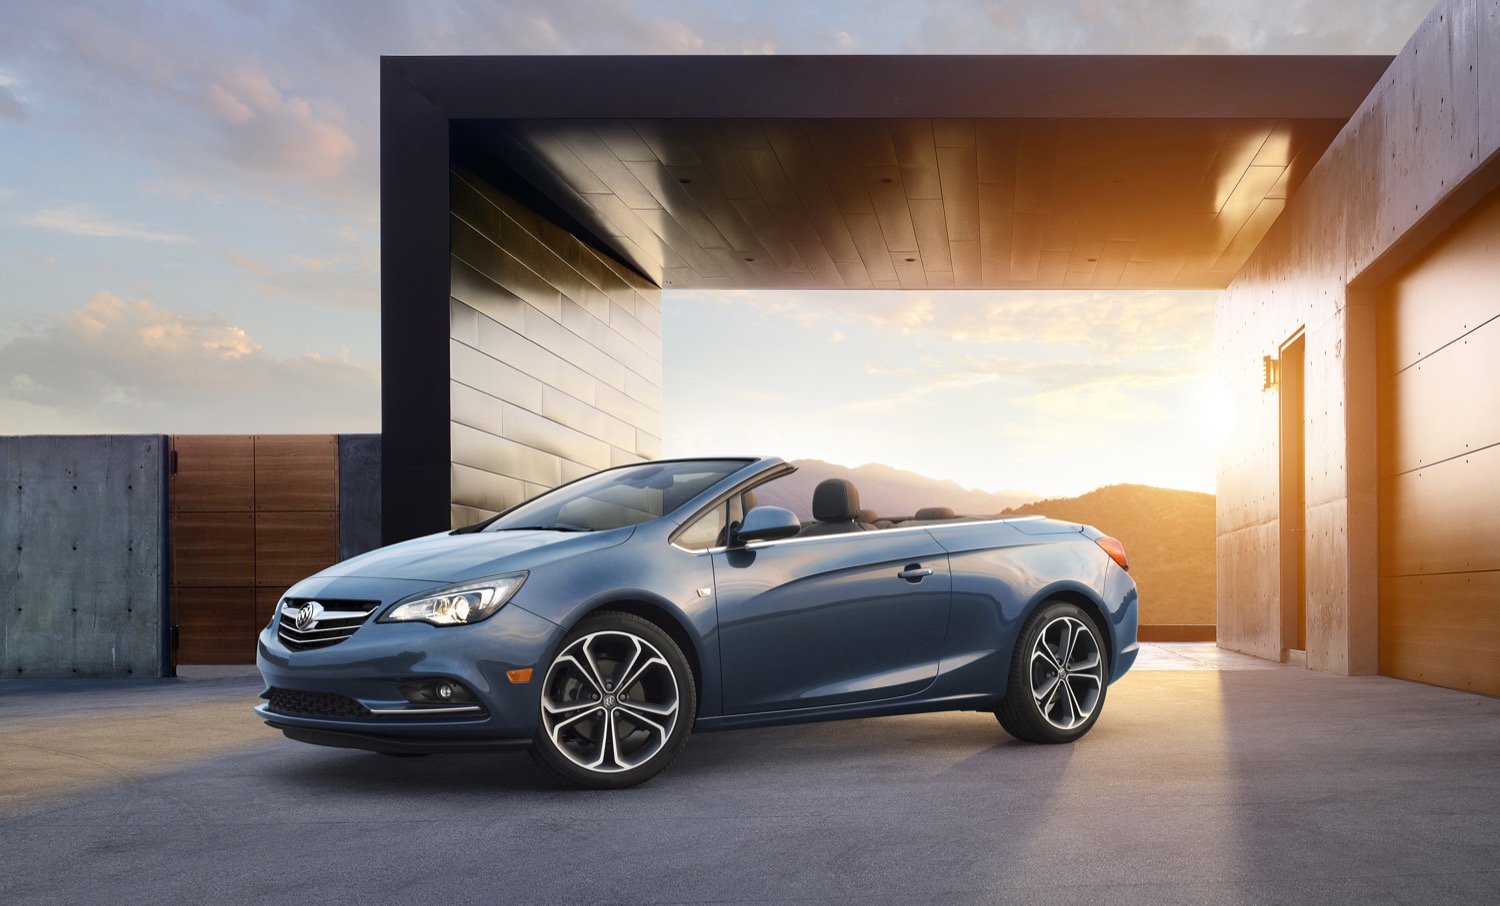 2016 Buick Cascada Convertible Info, Pictures, Specs, Wiki | GM ...